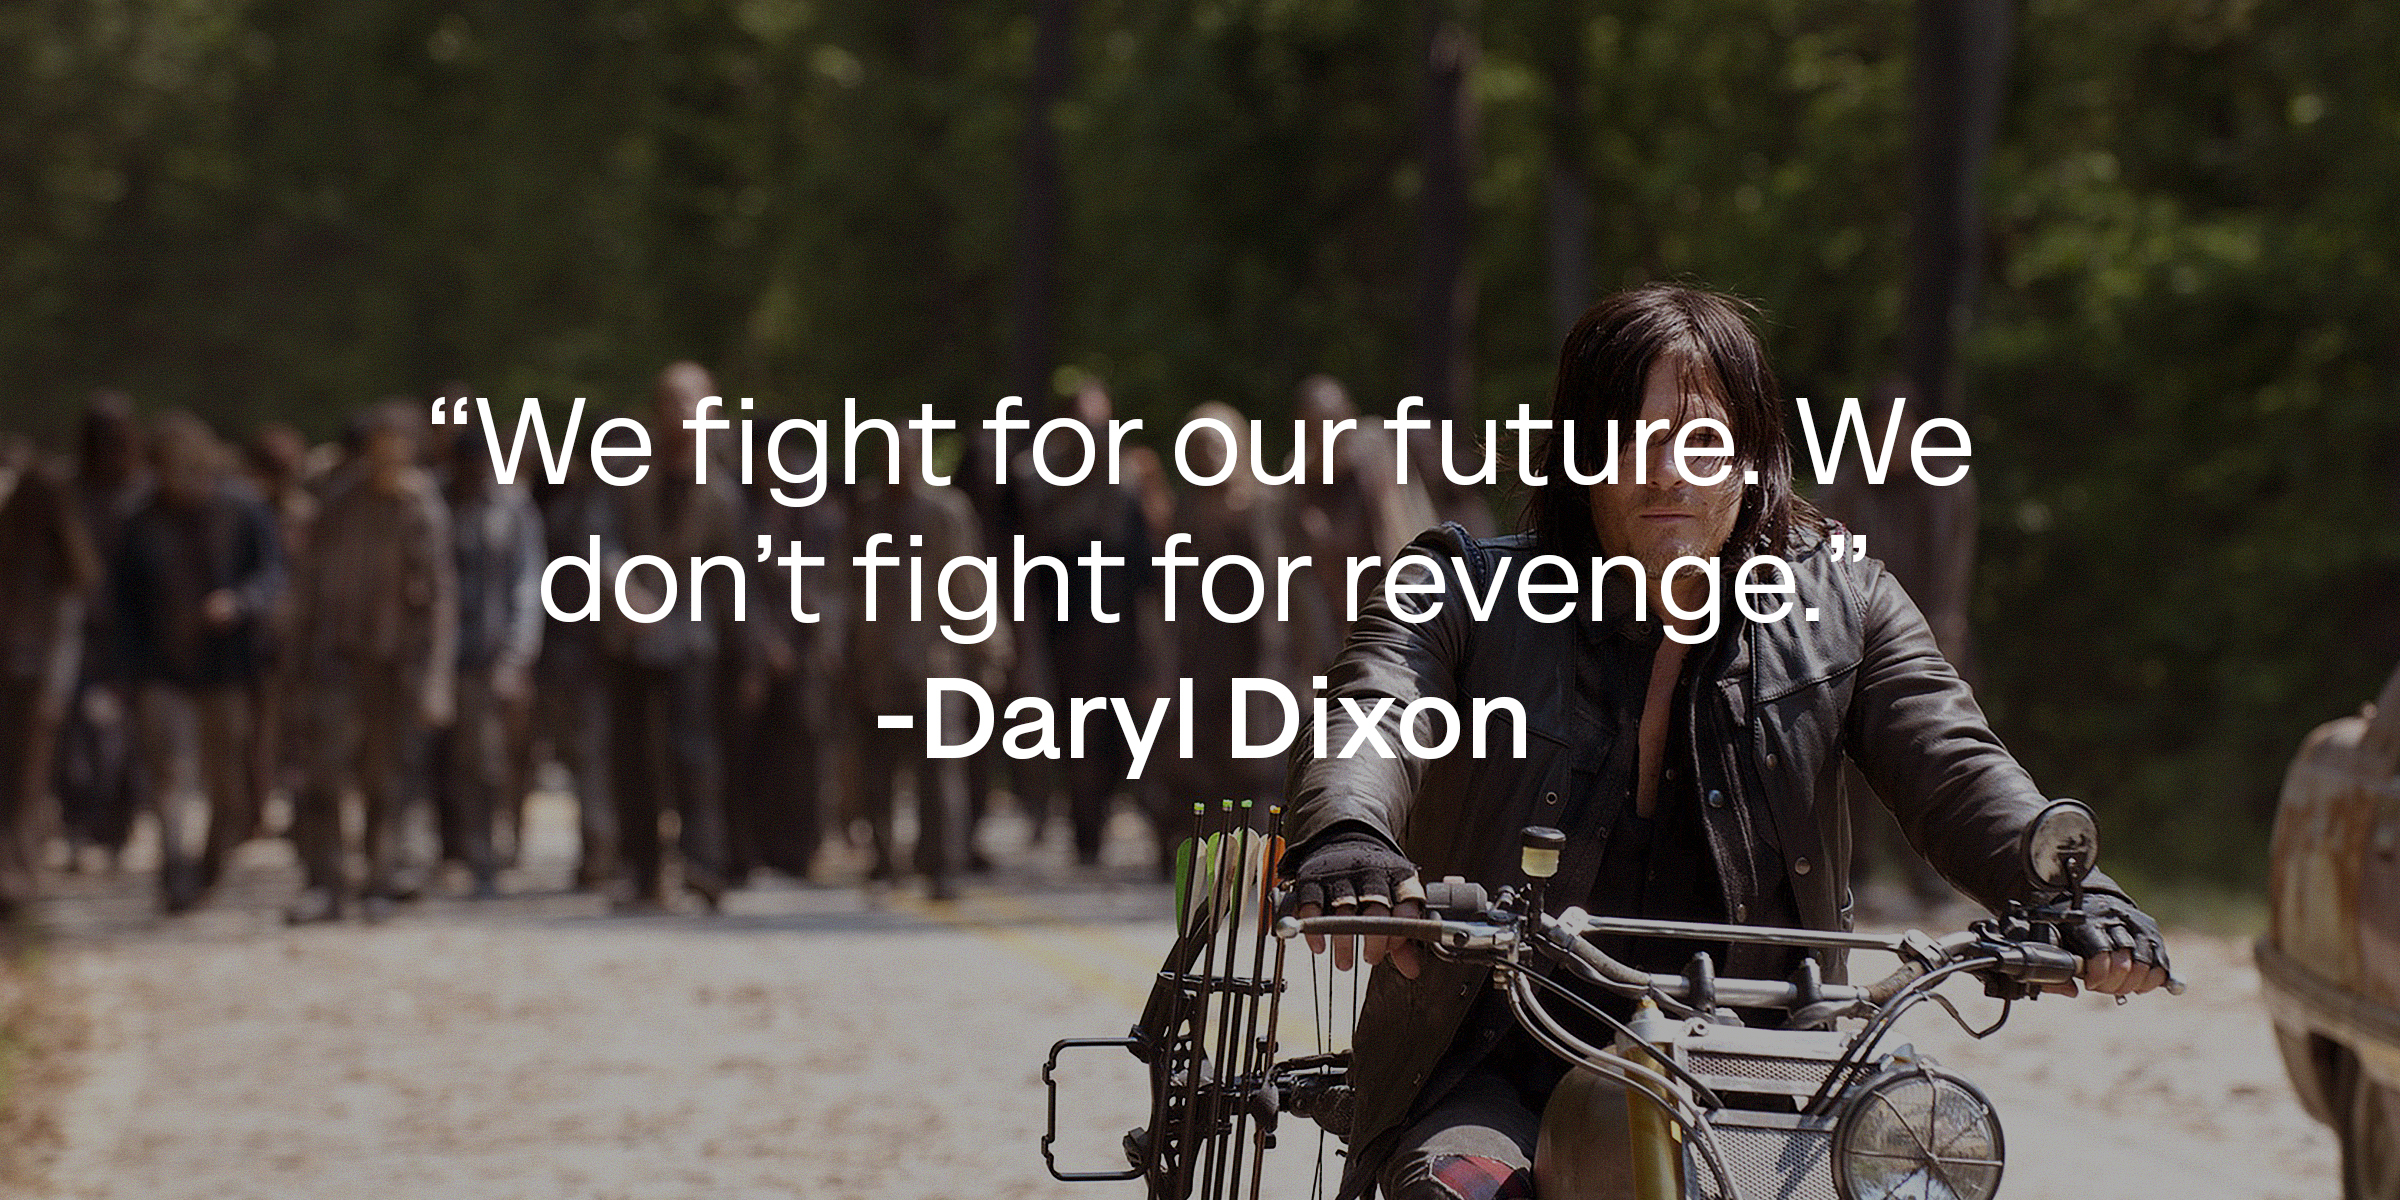 Daryl Dixon on a motorbike with his quote: “We fight for our future. We don’t fight for revenge.” | facebook.com/TheWalkingDeadAMC